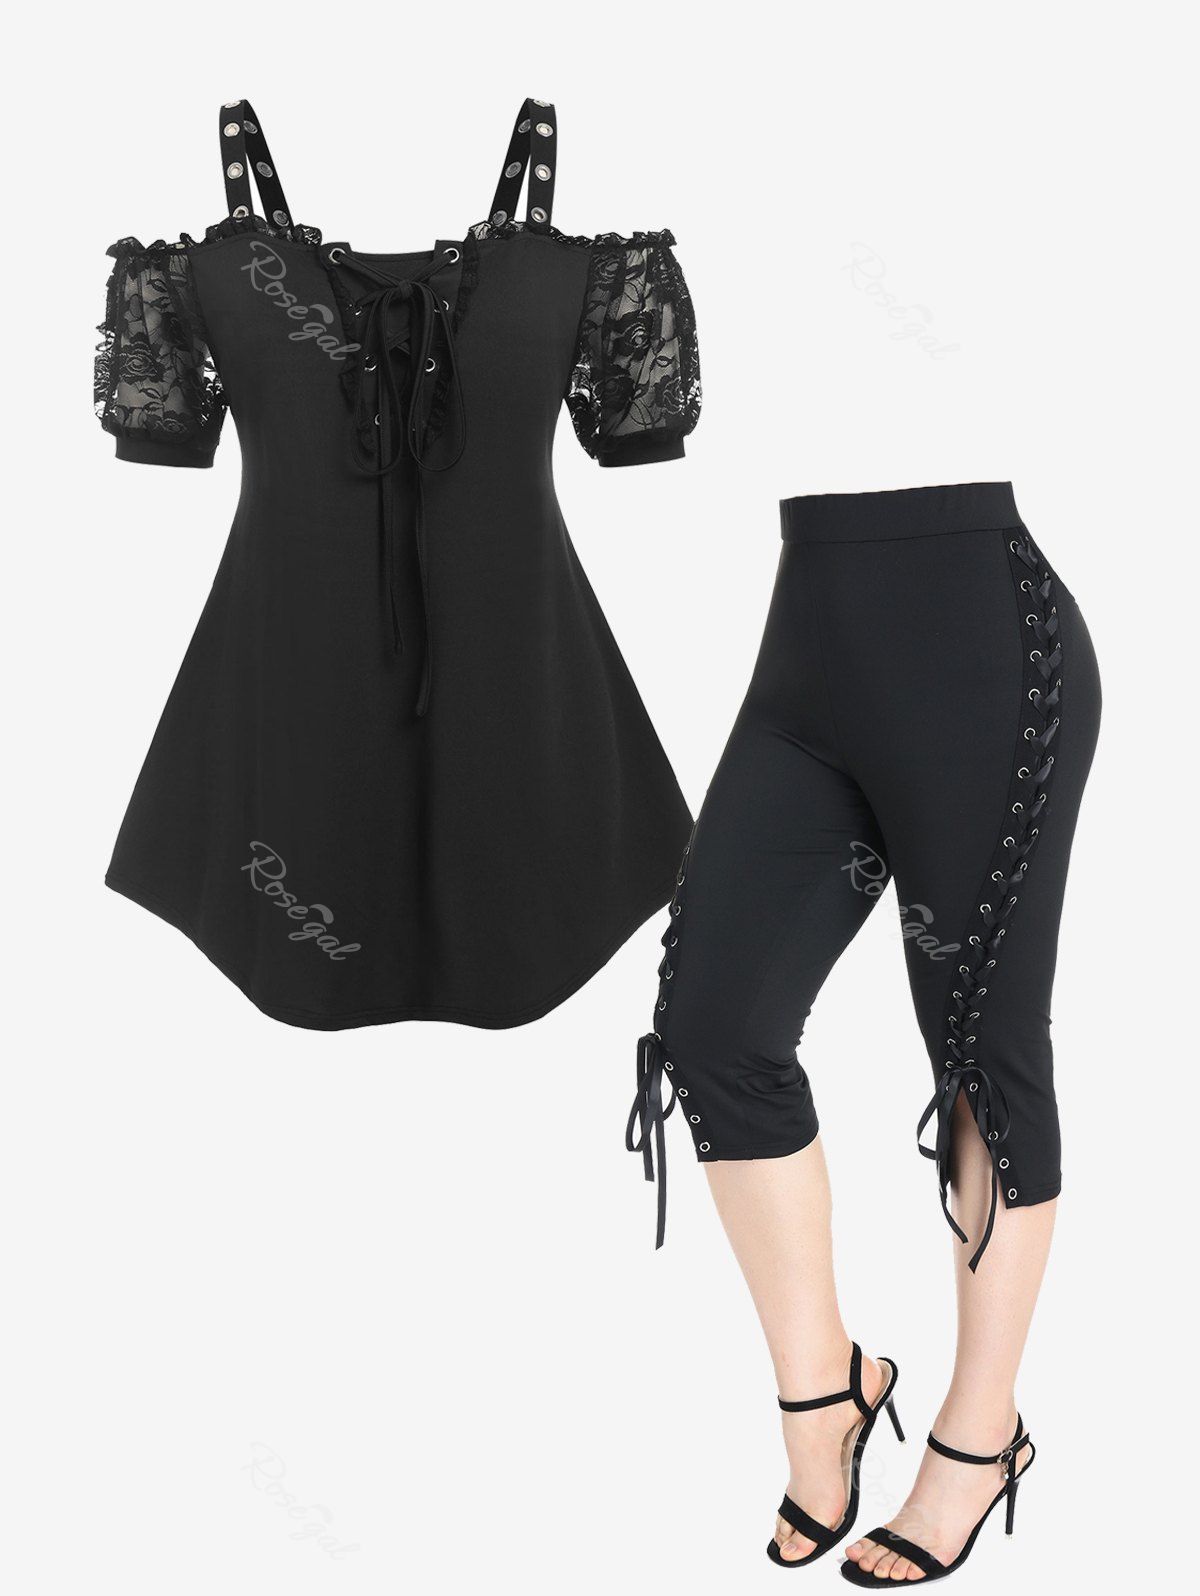 New Lace Insert Lace-up Cold Shoulder Ruffle Tee and Leggings Gothic Plus Size Outfit  